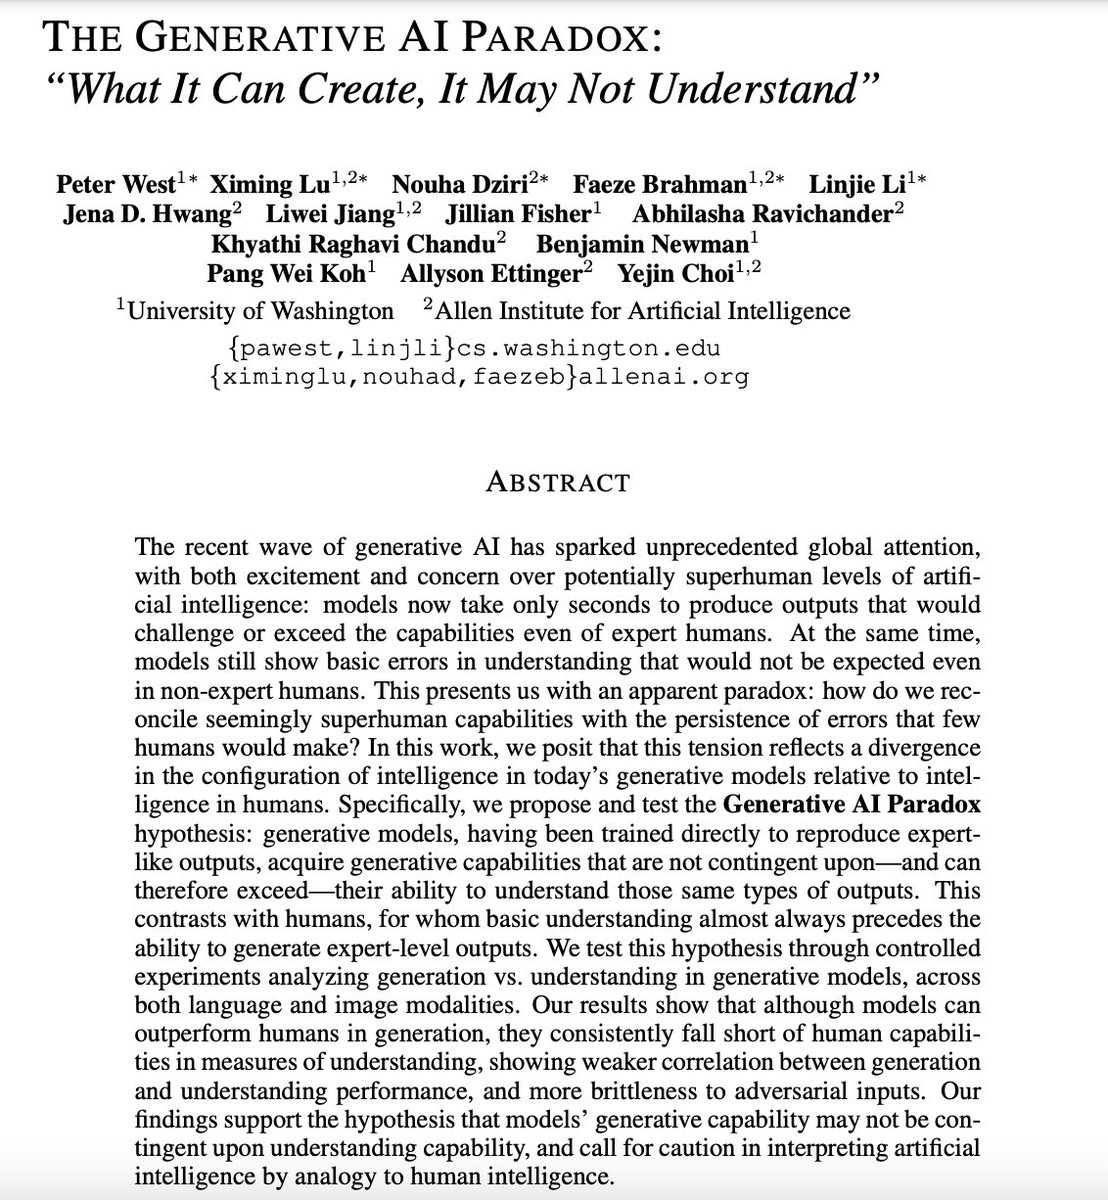 The closest paper I came across on this fundamental question:

arxiv.org/abs/2311.00059
by @PeterWestTM @GXiming @faeze_brh @nouhadziri @LINJIEFUN  and many more

(thanks for sending it my way @oscmansan)